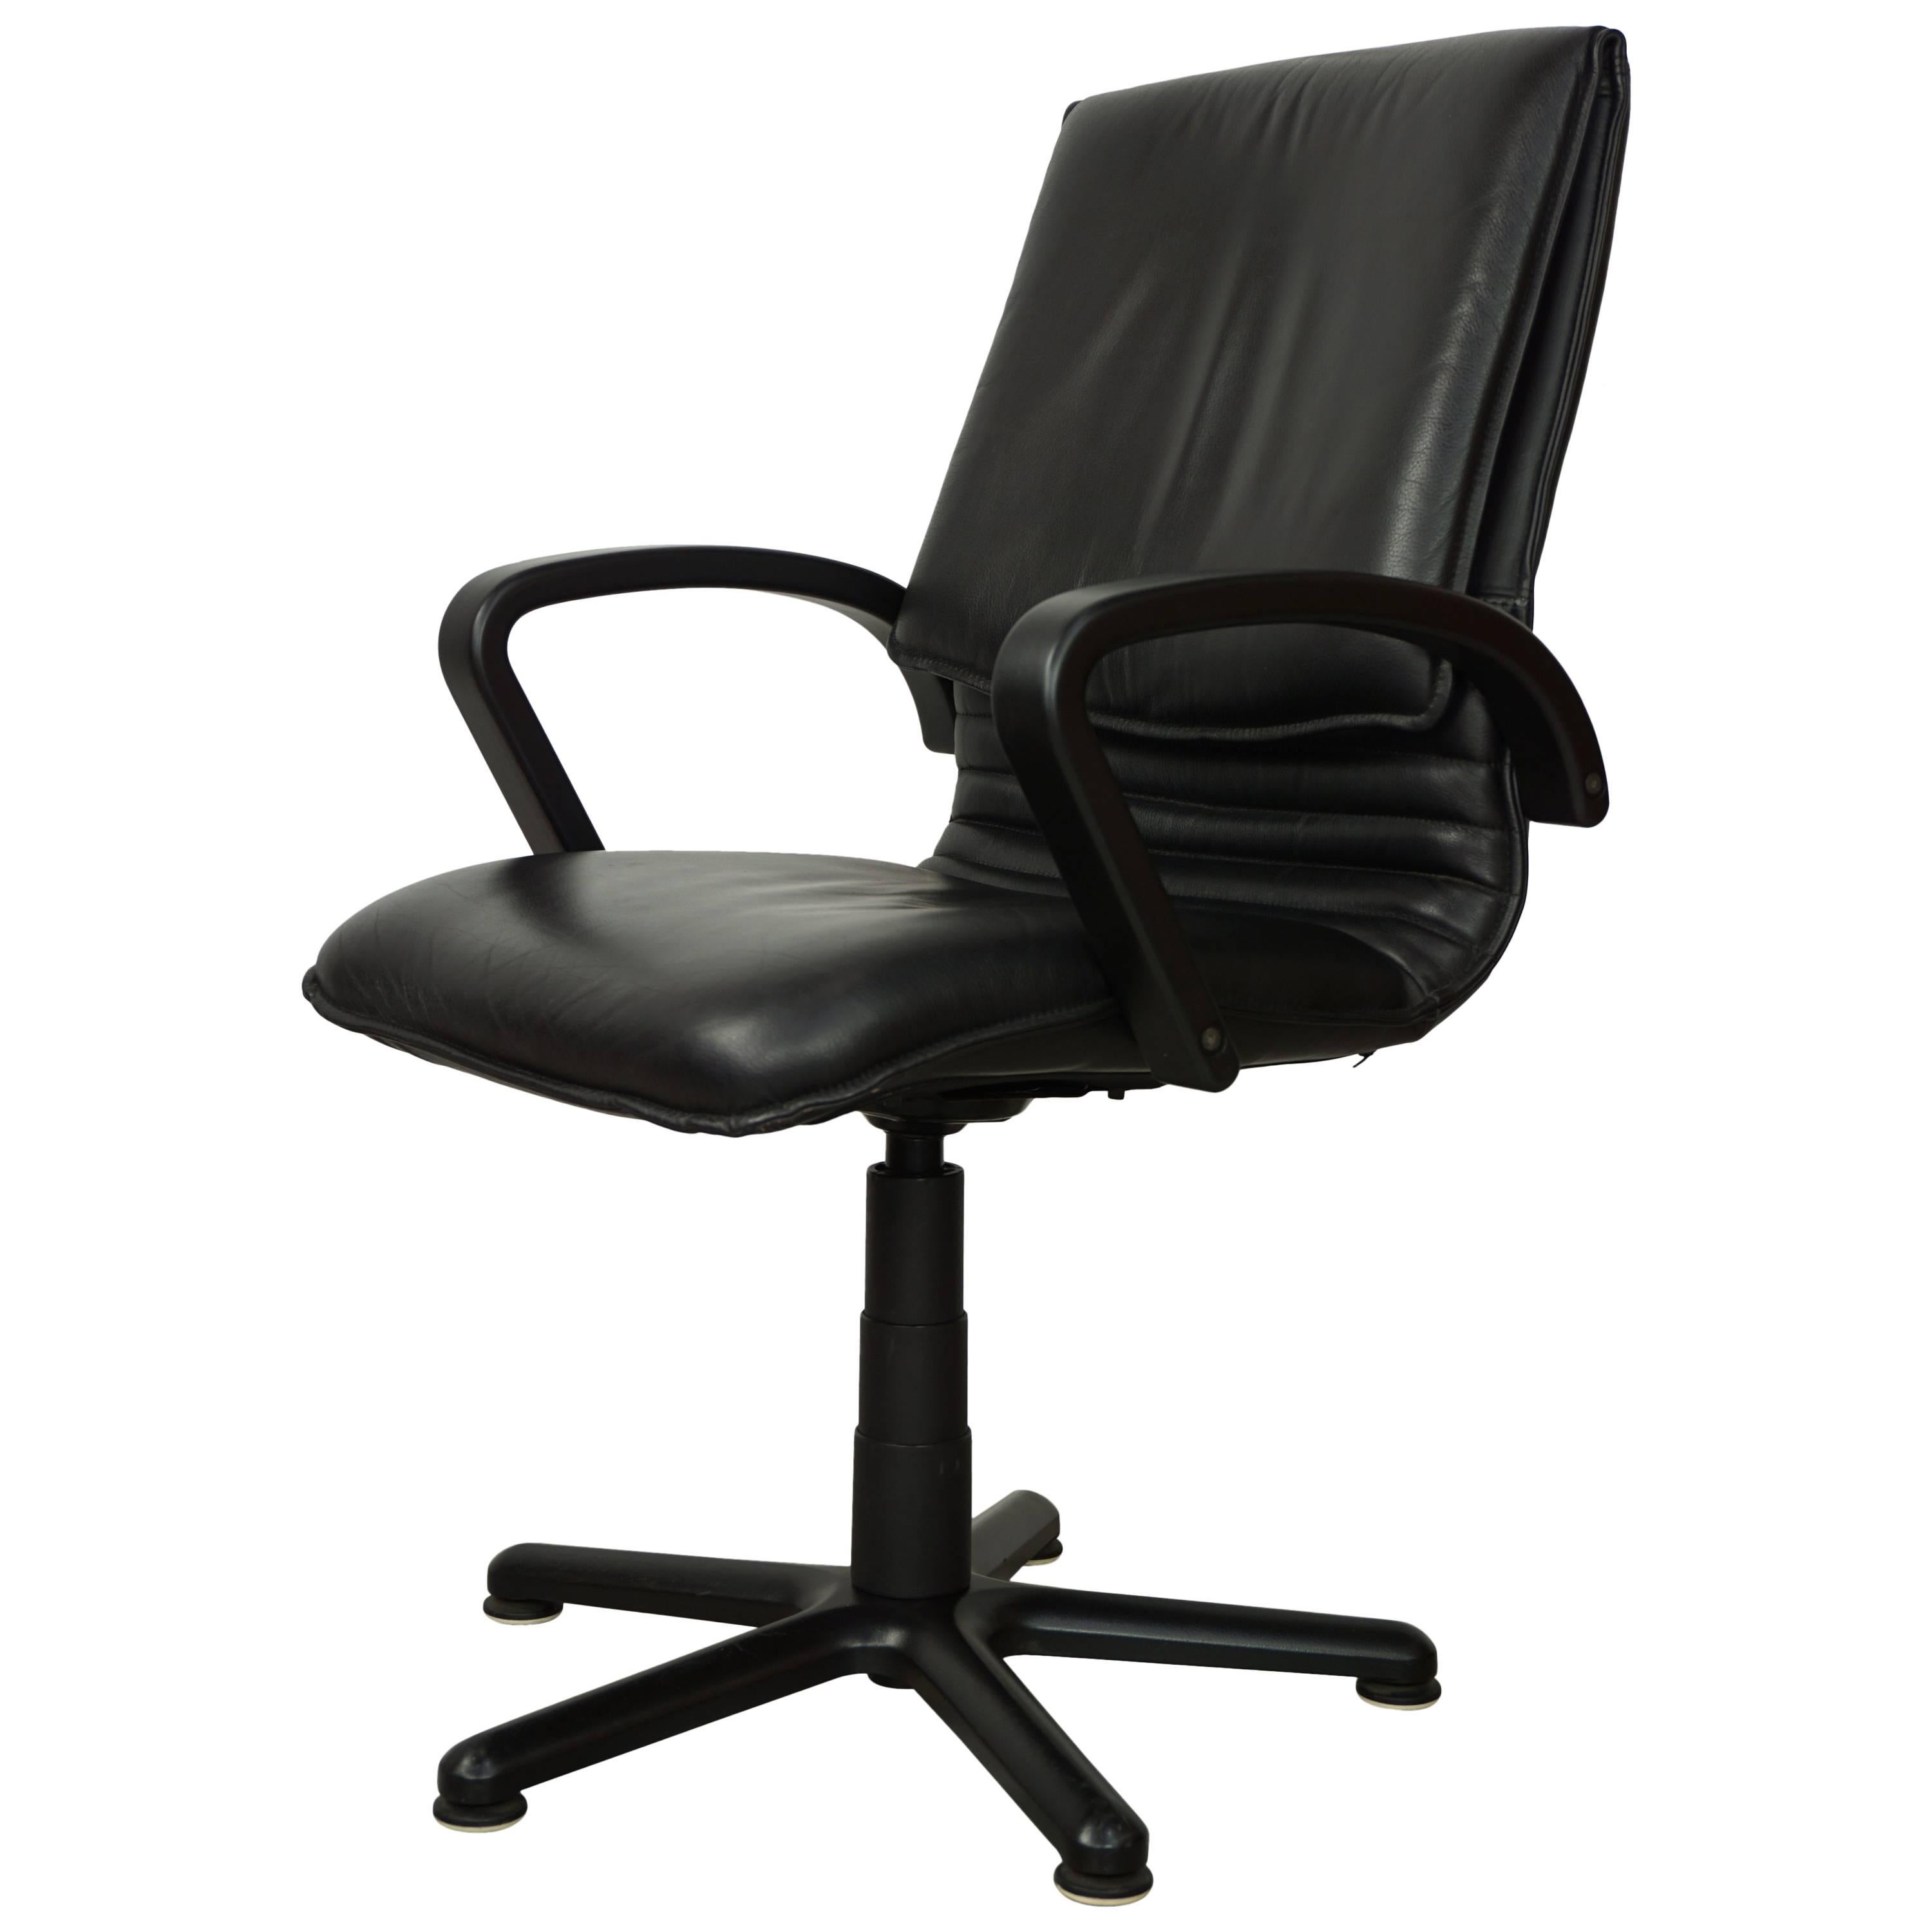 Black Wooden and Black Leather Swivel Office Design Armchair